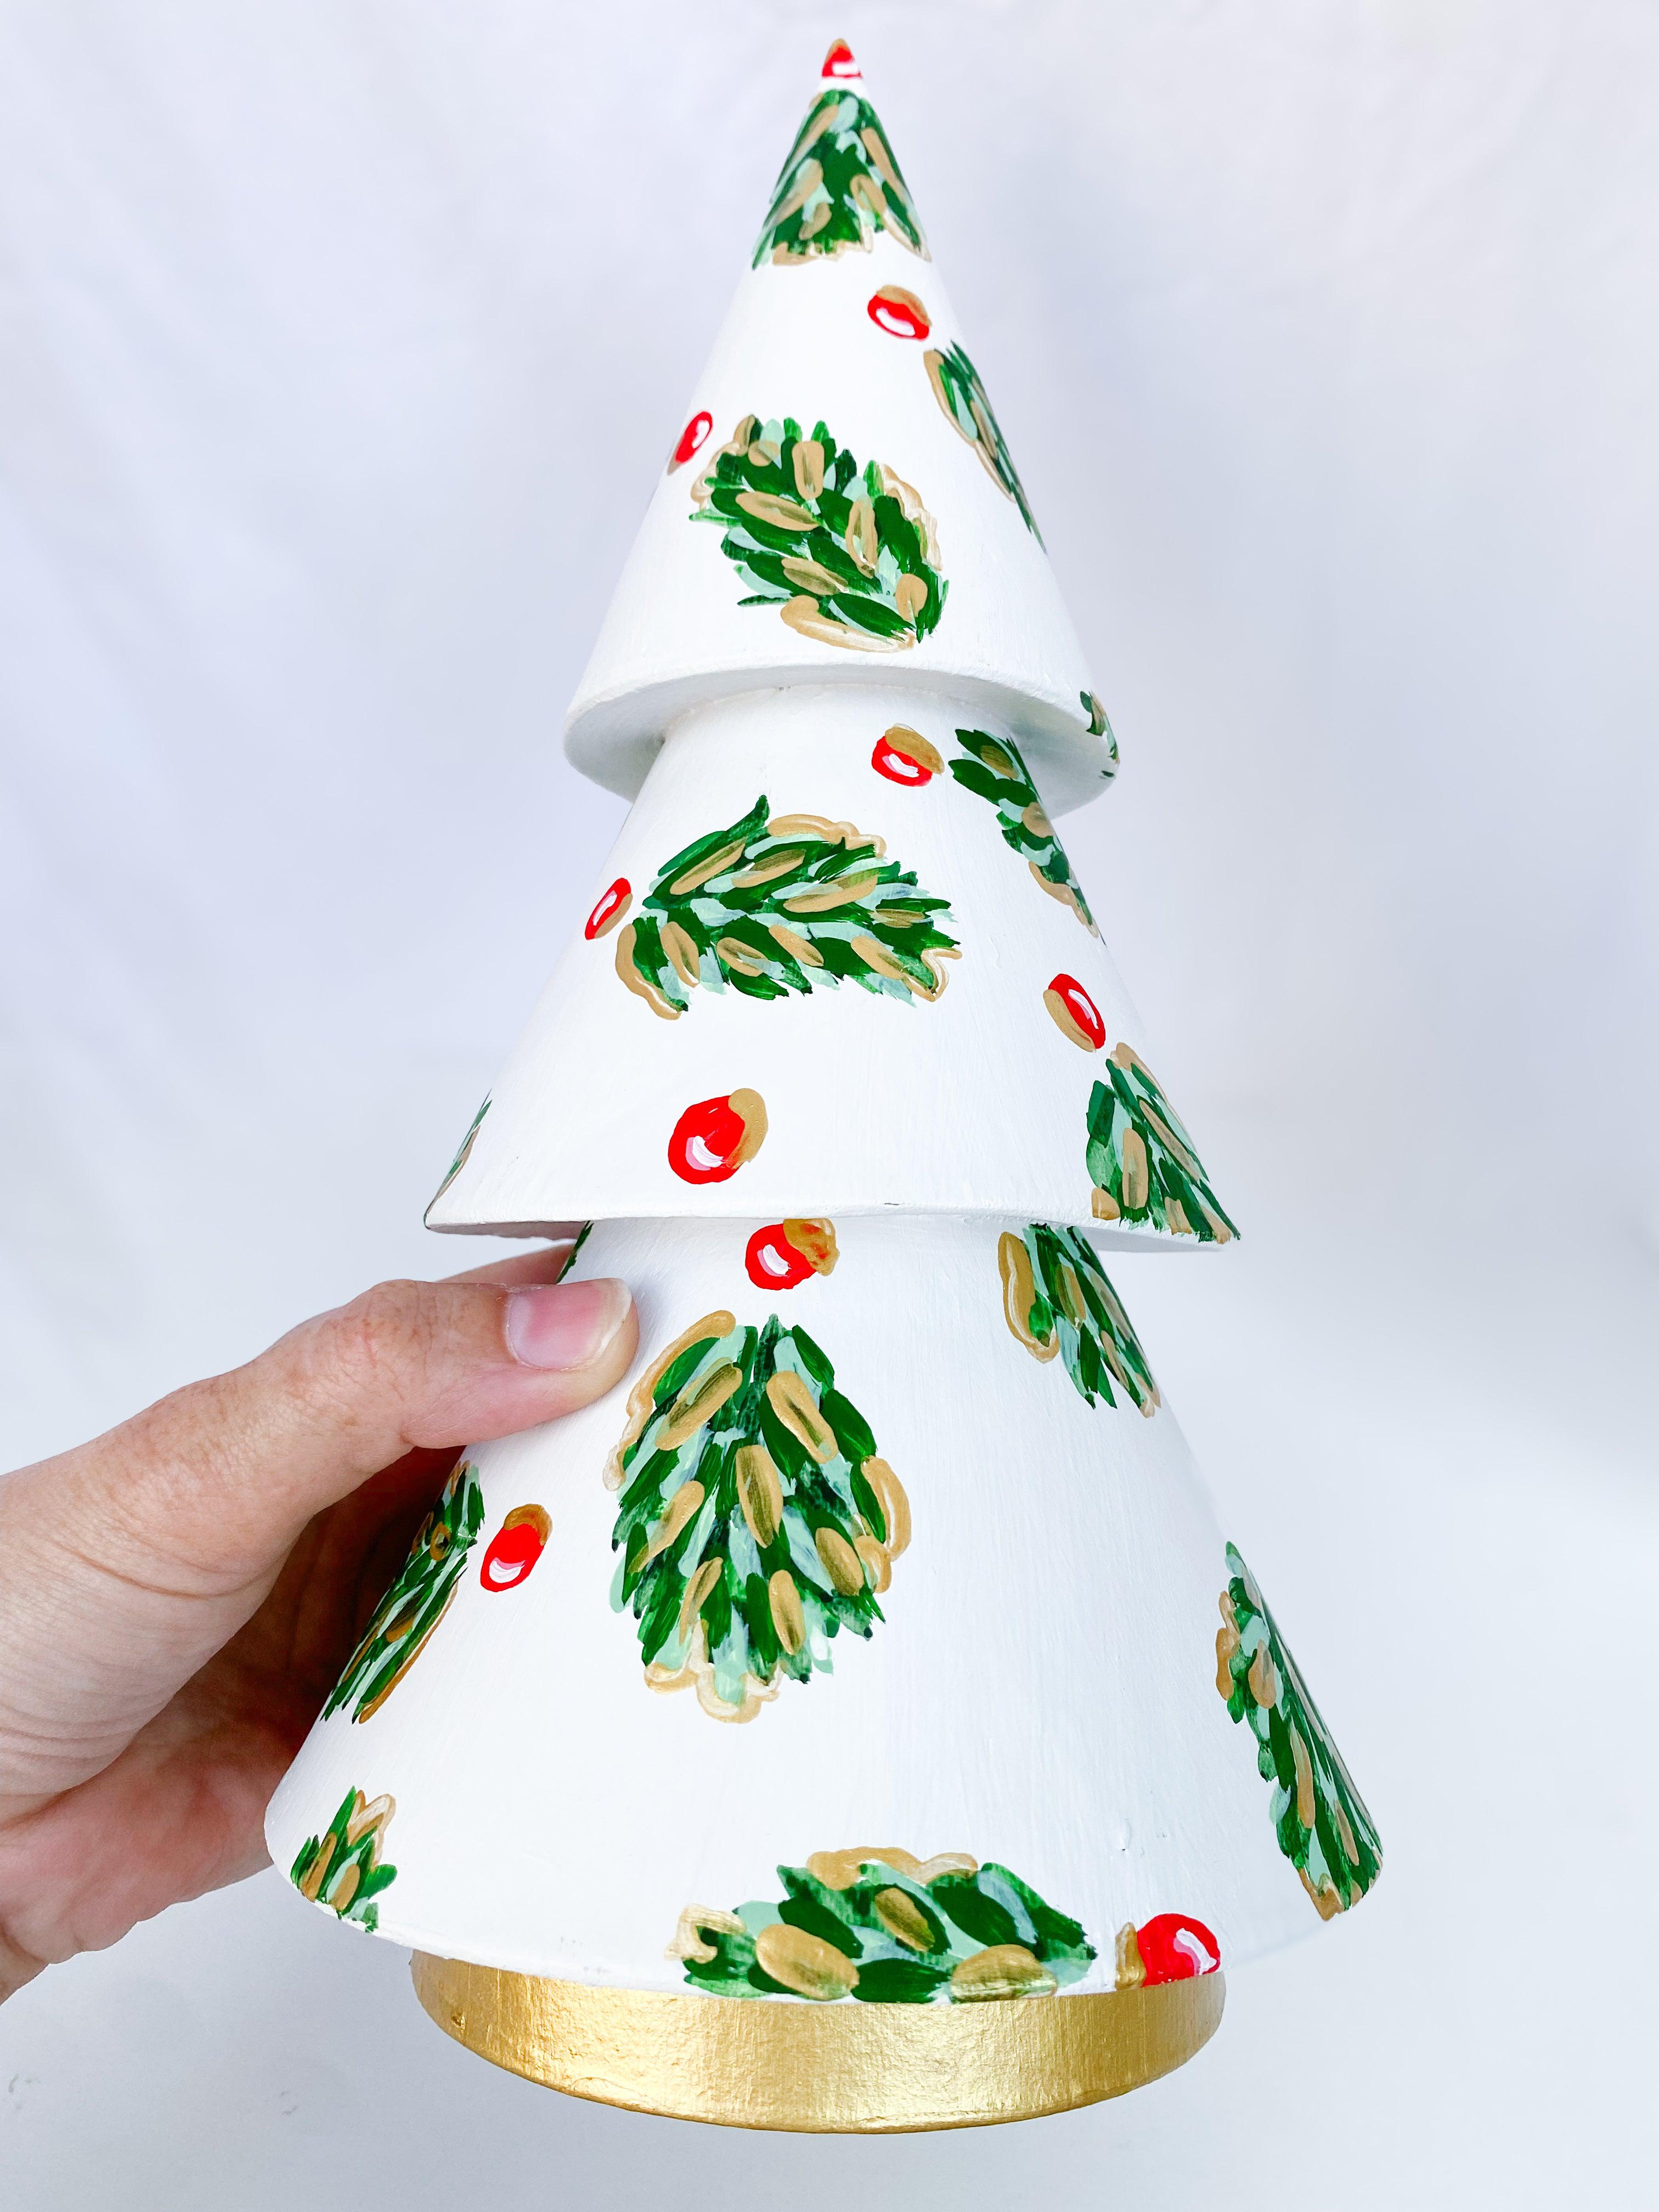 Winter Pearl Golden Holly Mini Tree - Tall-Hand-Painted Mini Christmas Tree | Measures 12" tall and approx. 6" wide | Features the Golden Holly design with an ivory base and shimmery gold accents and gold trunk | Light-weight and non-breakable paper mache tree | Coated with a protective matte finish that will keep it shimmering year after year | Each tree is slightly different with potential small imperfections due to the hand-painted nature, making each one special and unique!-The Singing Little Bird